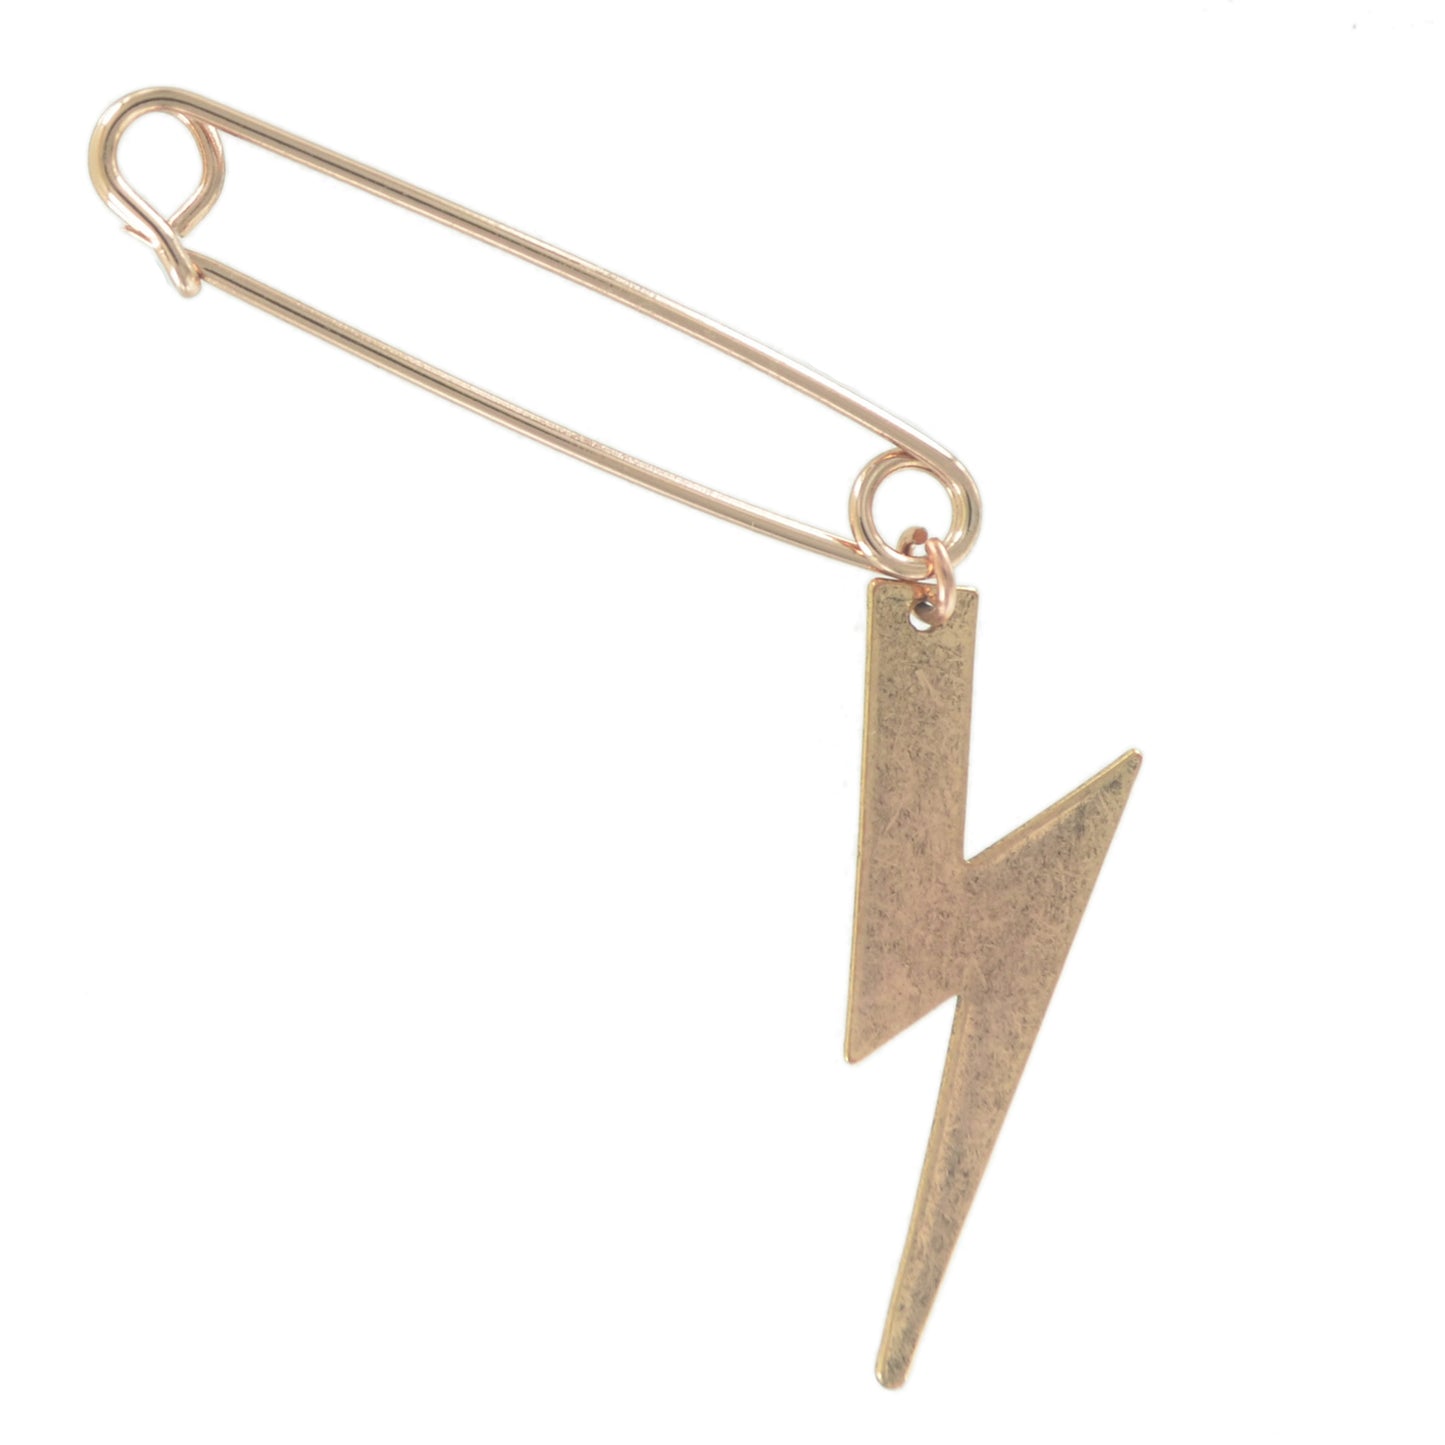 Ky & Co Made in USA Safety Pin Brooch Lightning Bolt Charm Dangle Rose Gold Tone